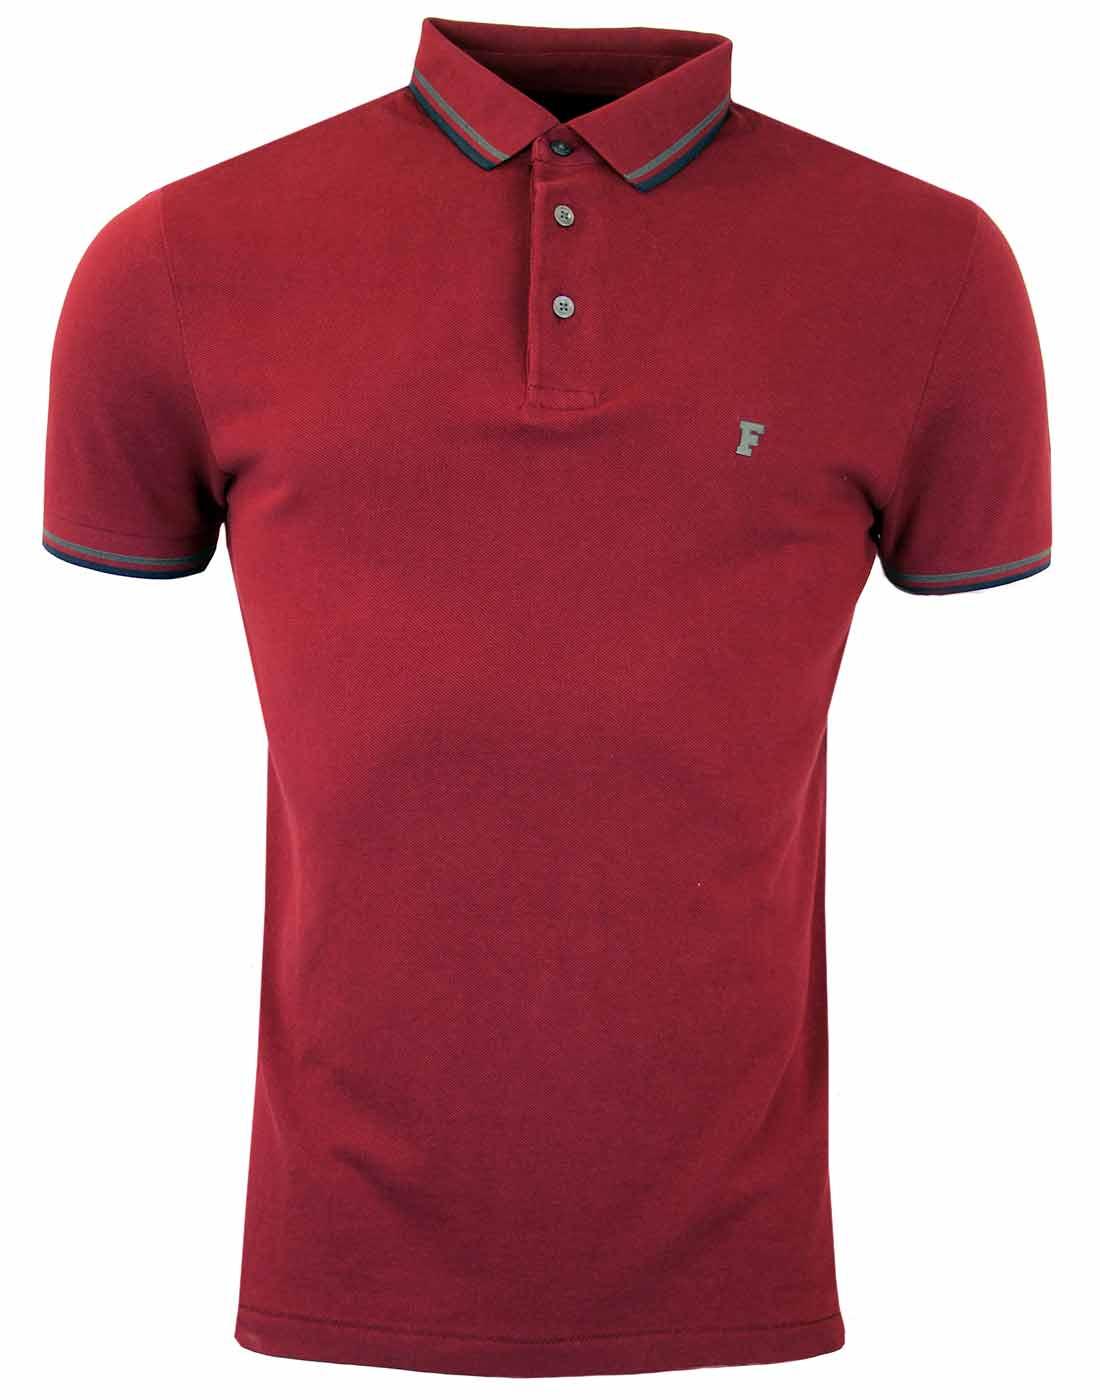 FRENCH CONNECTION Retro Mod Tipped Polo